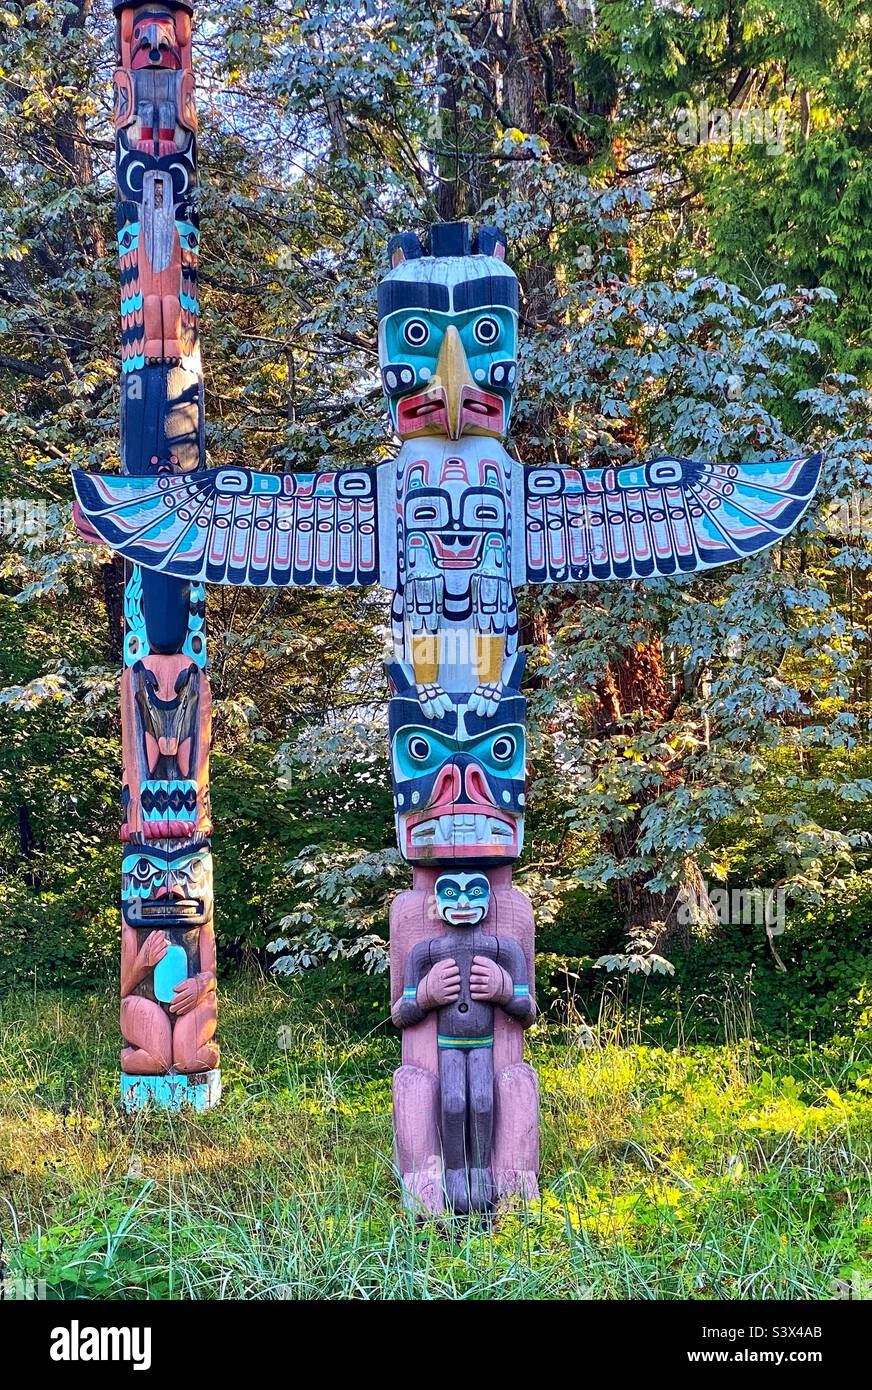 Totem poles at Stanley park. Vancouver Canada. Stock Photo